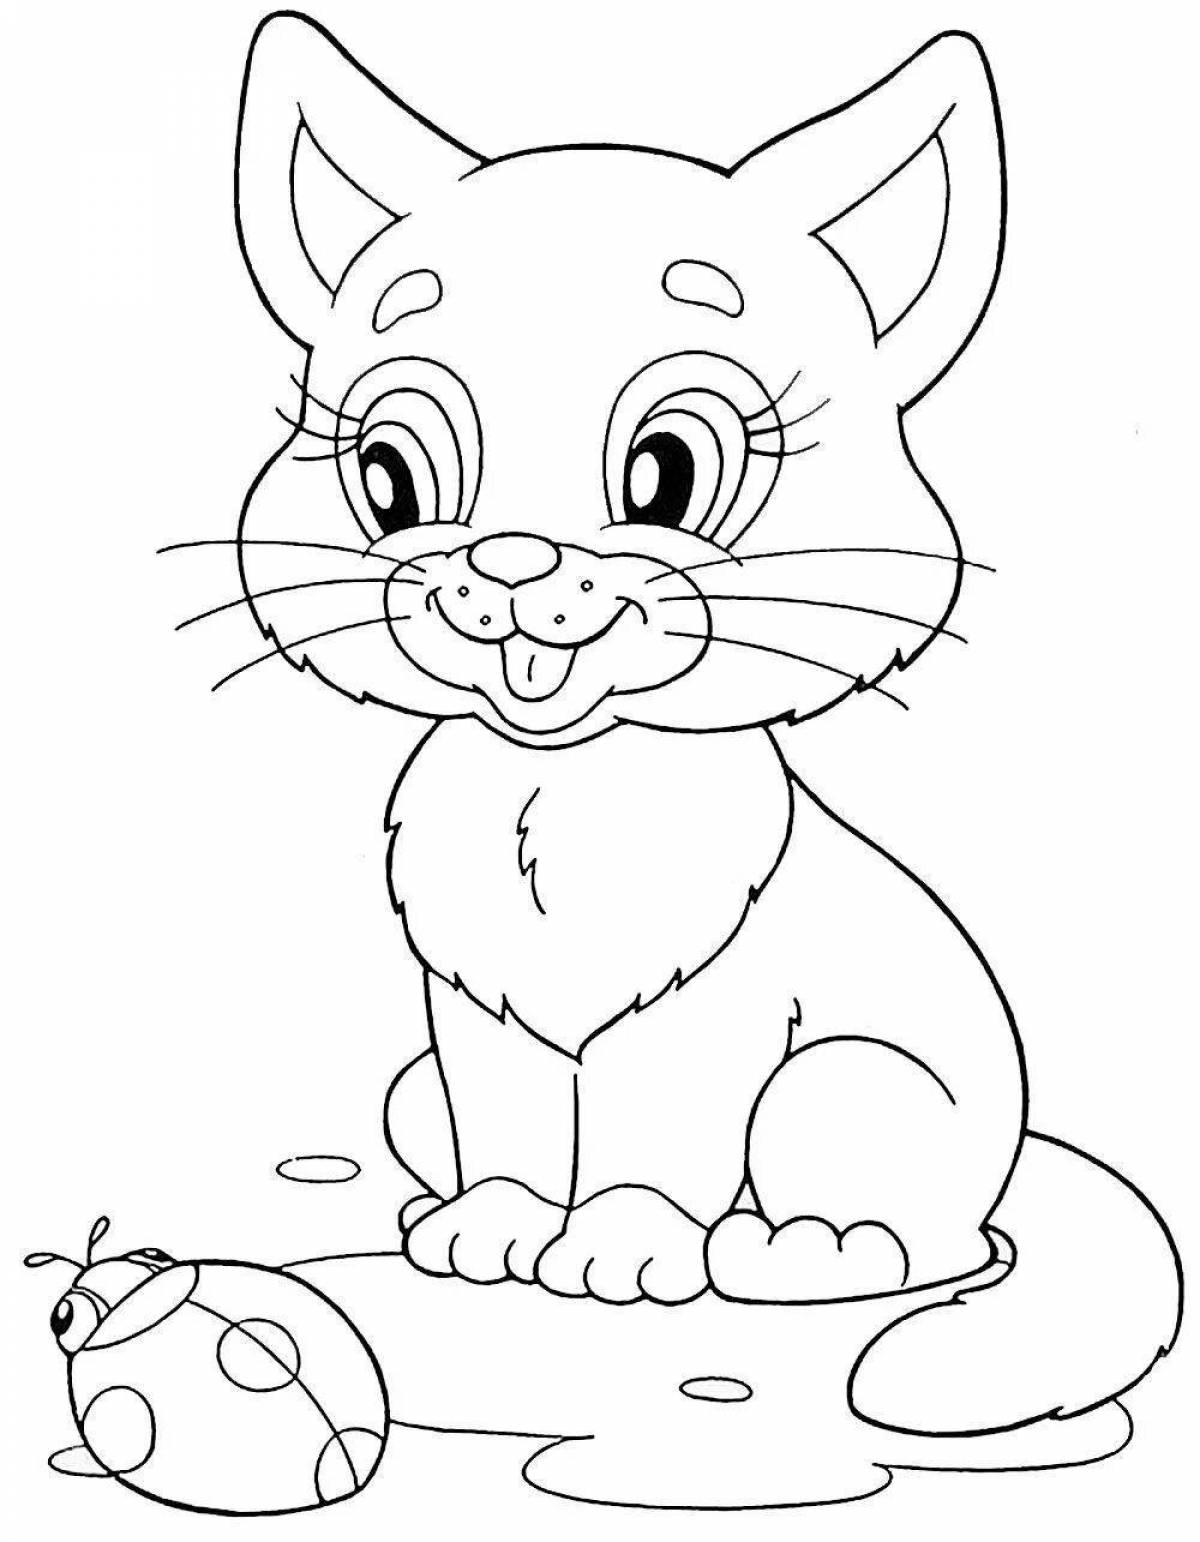 Snuggly coloring page cat for 2-3 year olds